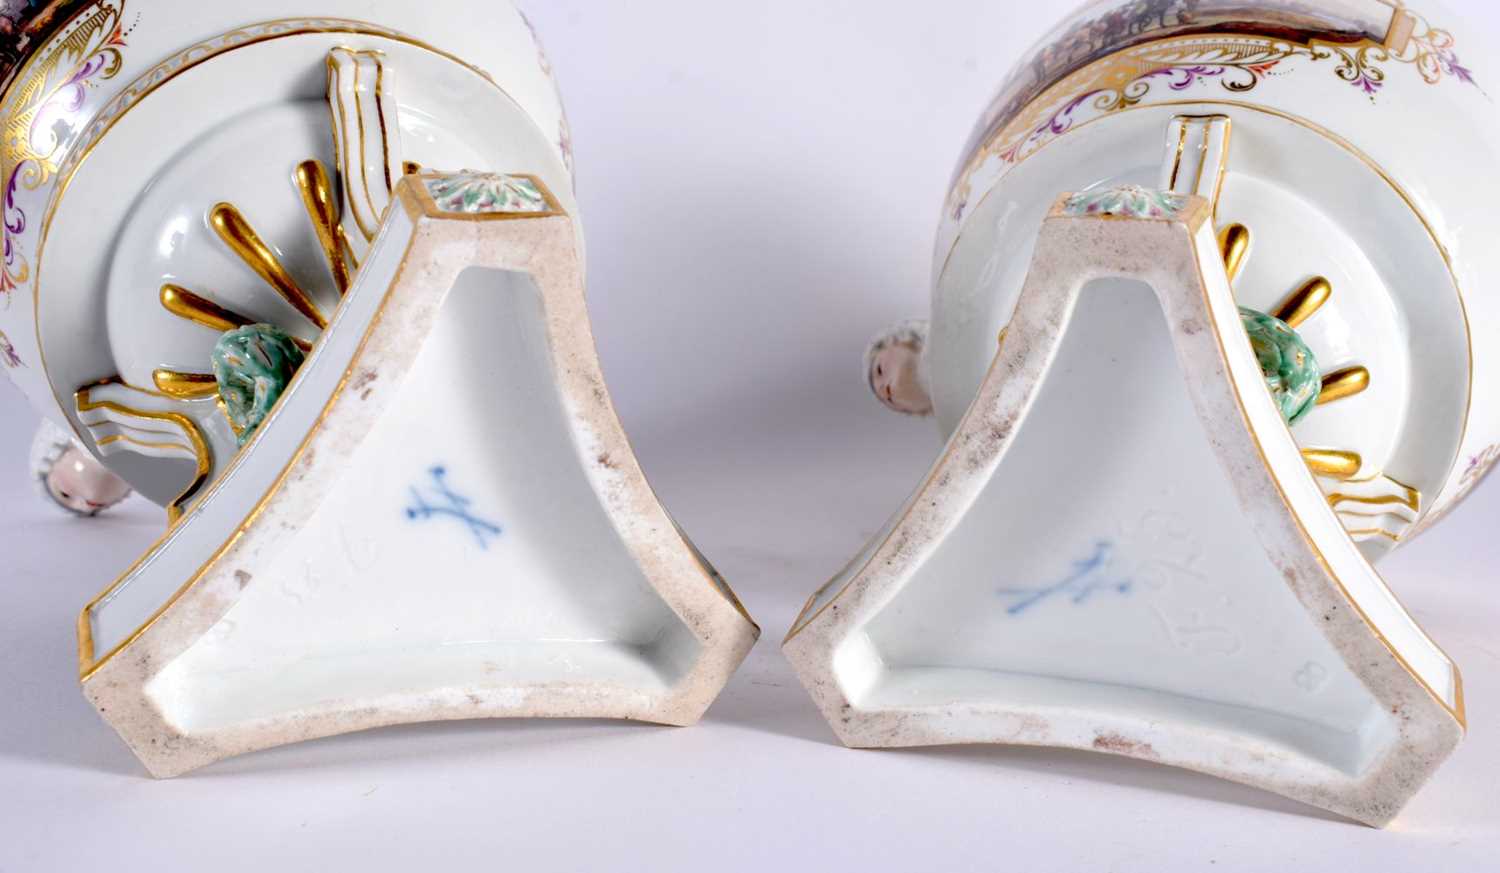 A FINE PAIR OF 19TH ENTURY MEISSEN POT-POURRI VASES AND COVERS with blue crossed swords marks, - Image 8 of 18